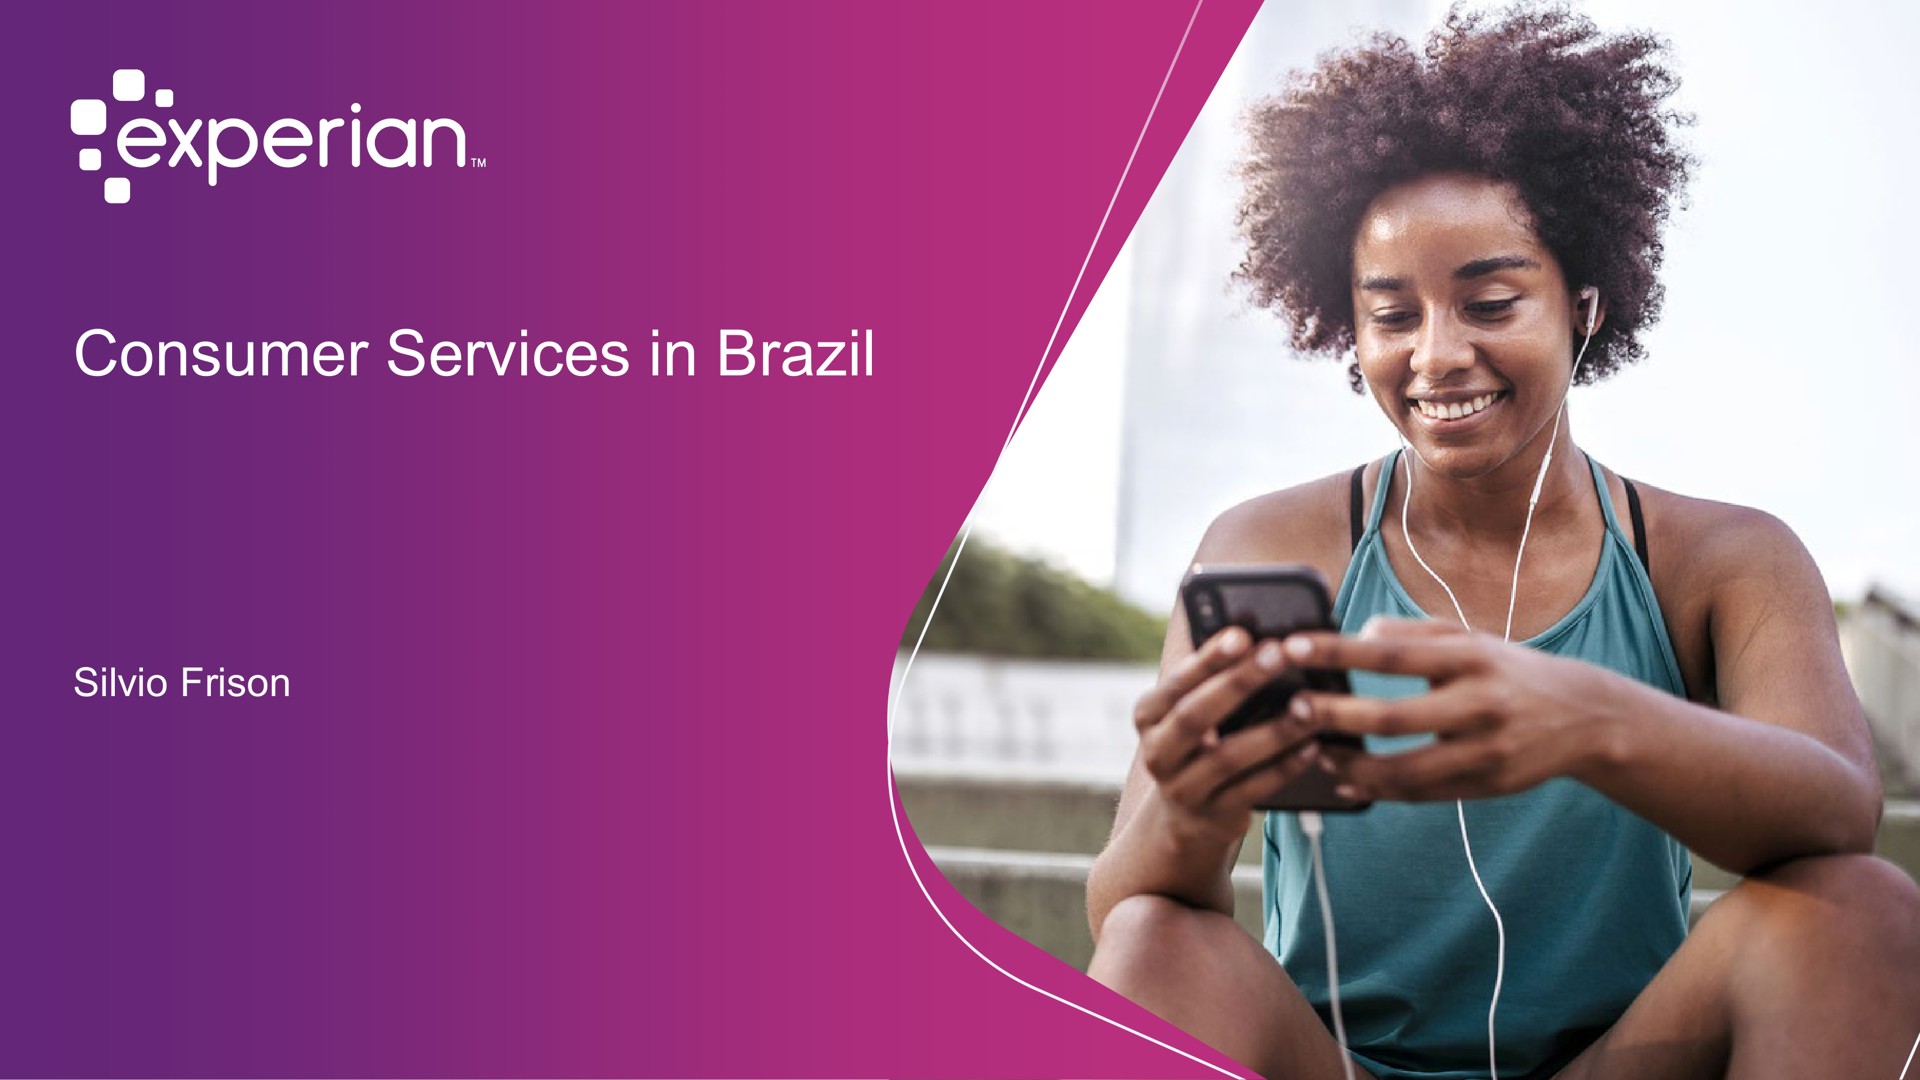 consumer services in brazil | Experian